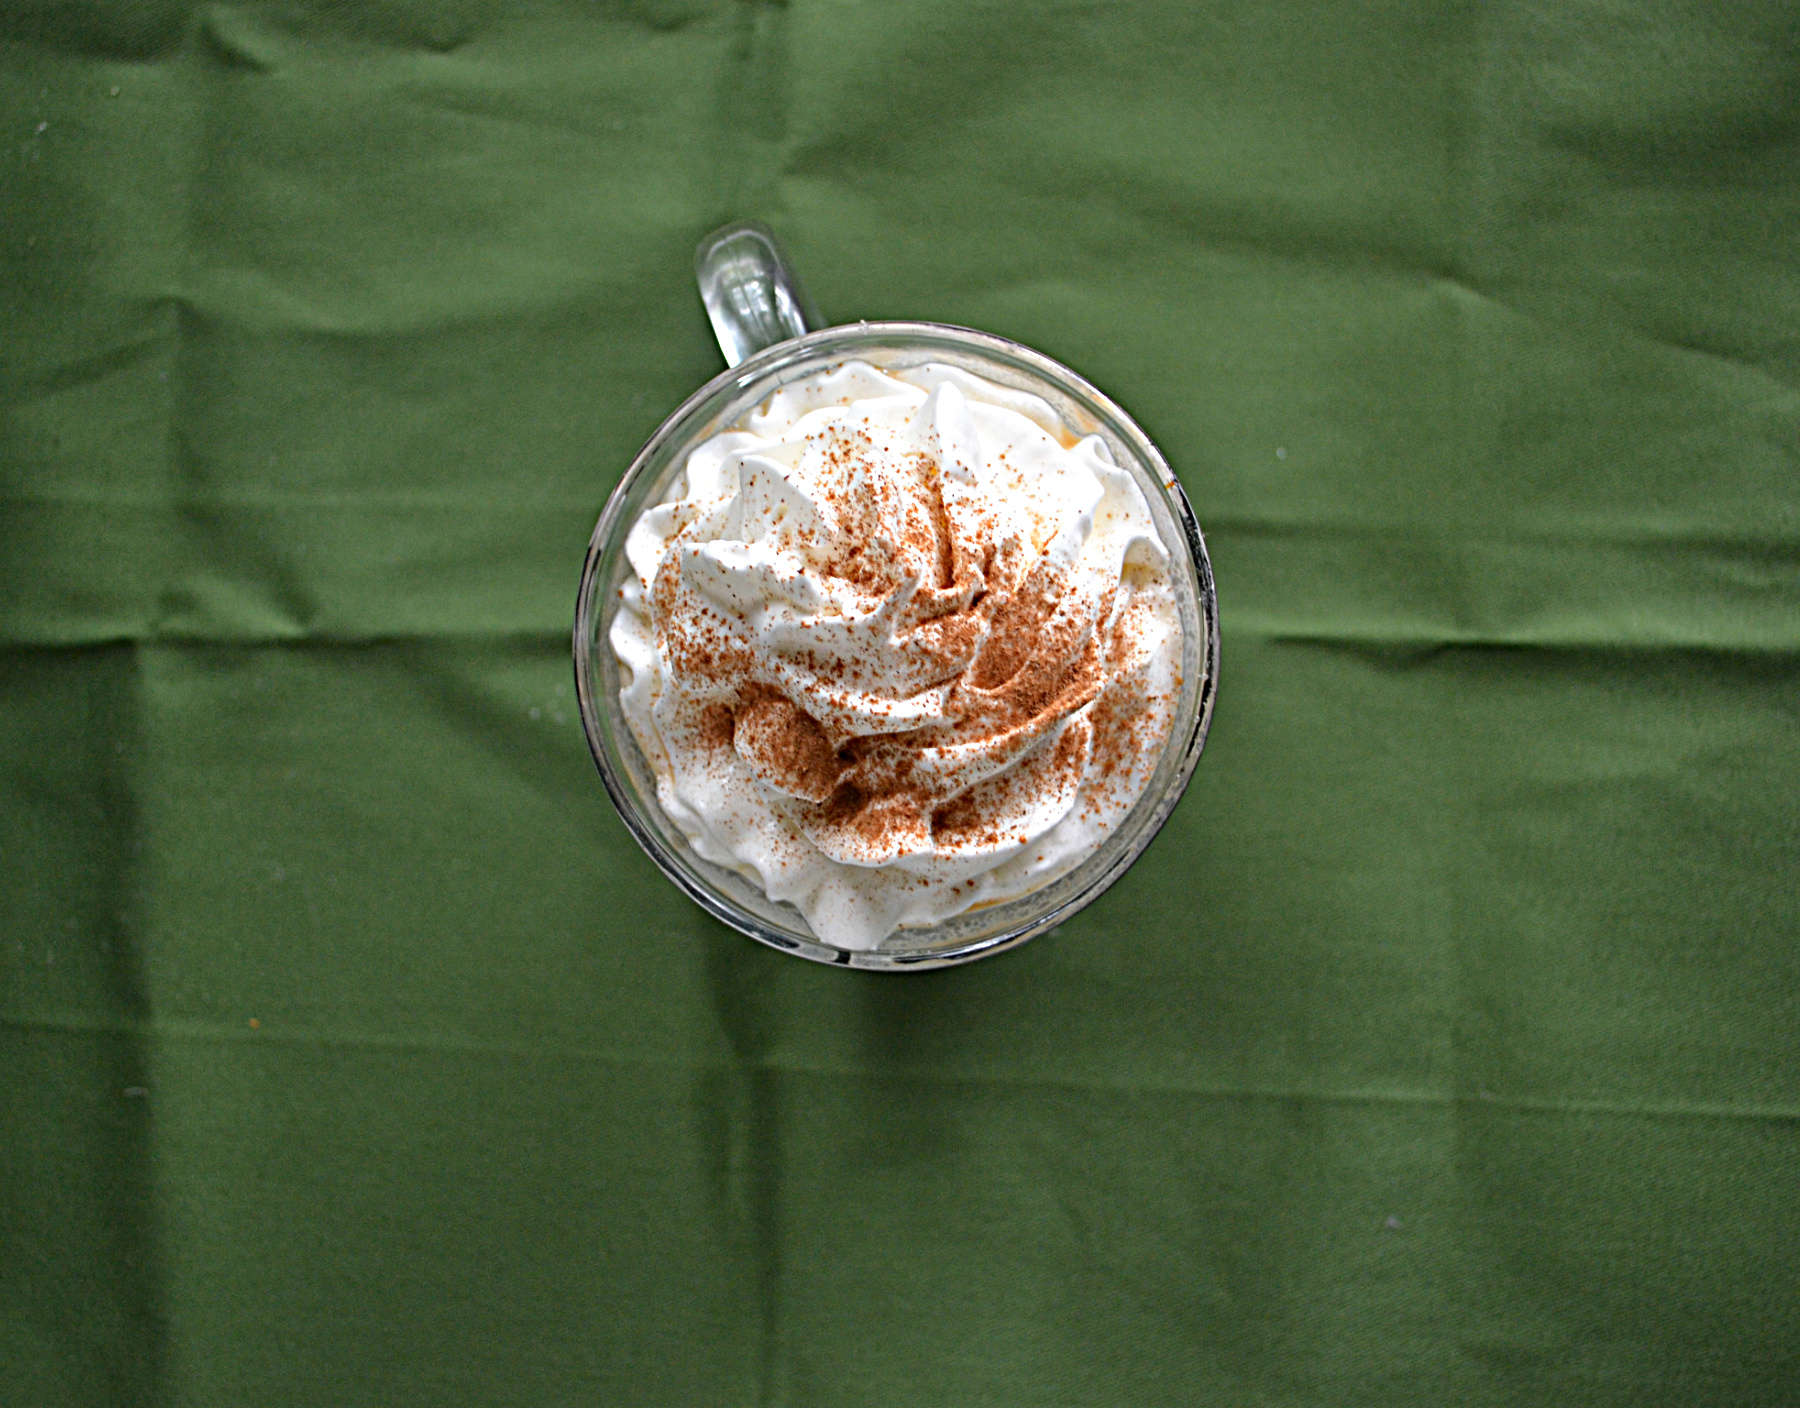 A top view of the whipped cream on a pumpkin Latte.